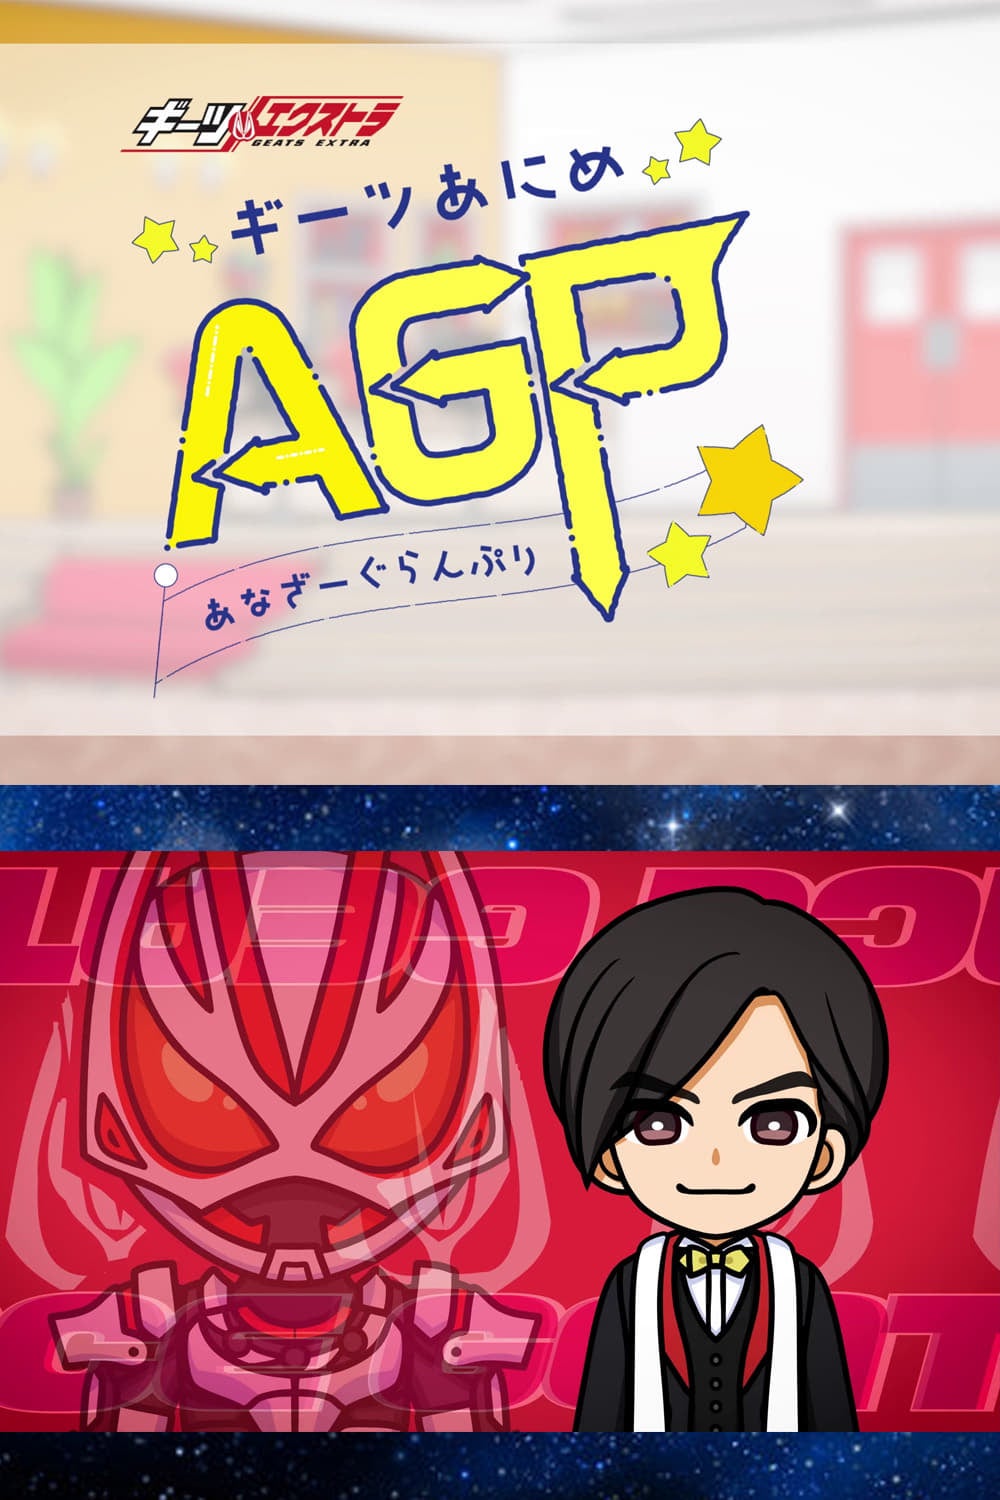 JEFusion | Japanese Entertainment Blog - The Center of Tokusatsu: Kamen  Rider Geats - The Fever Is On! A New Power-up Is Here!